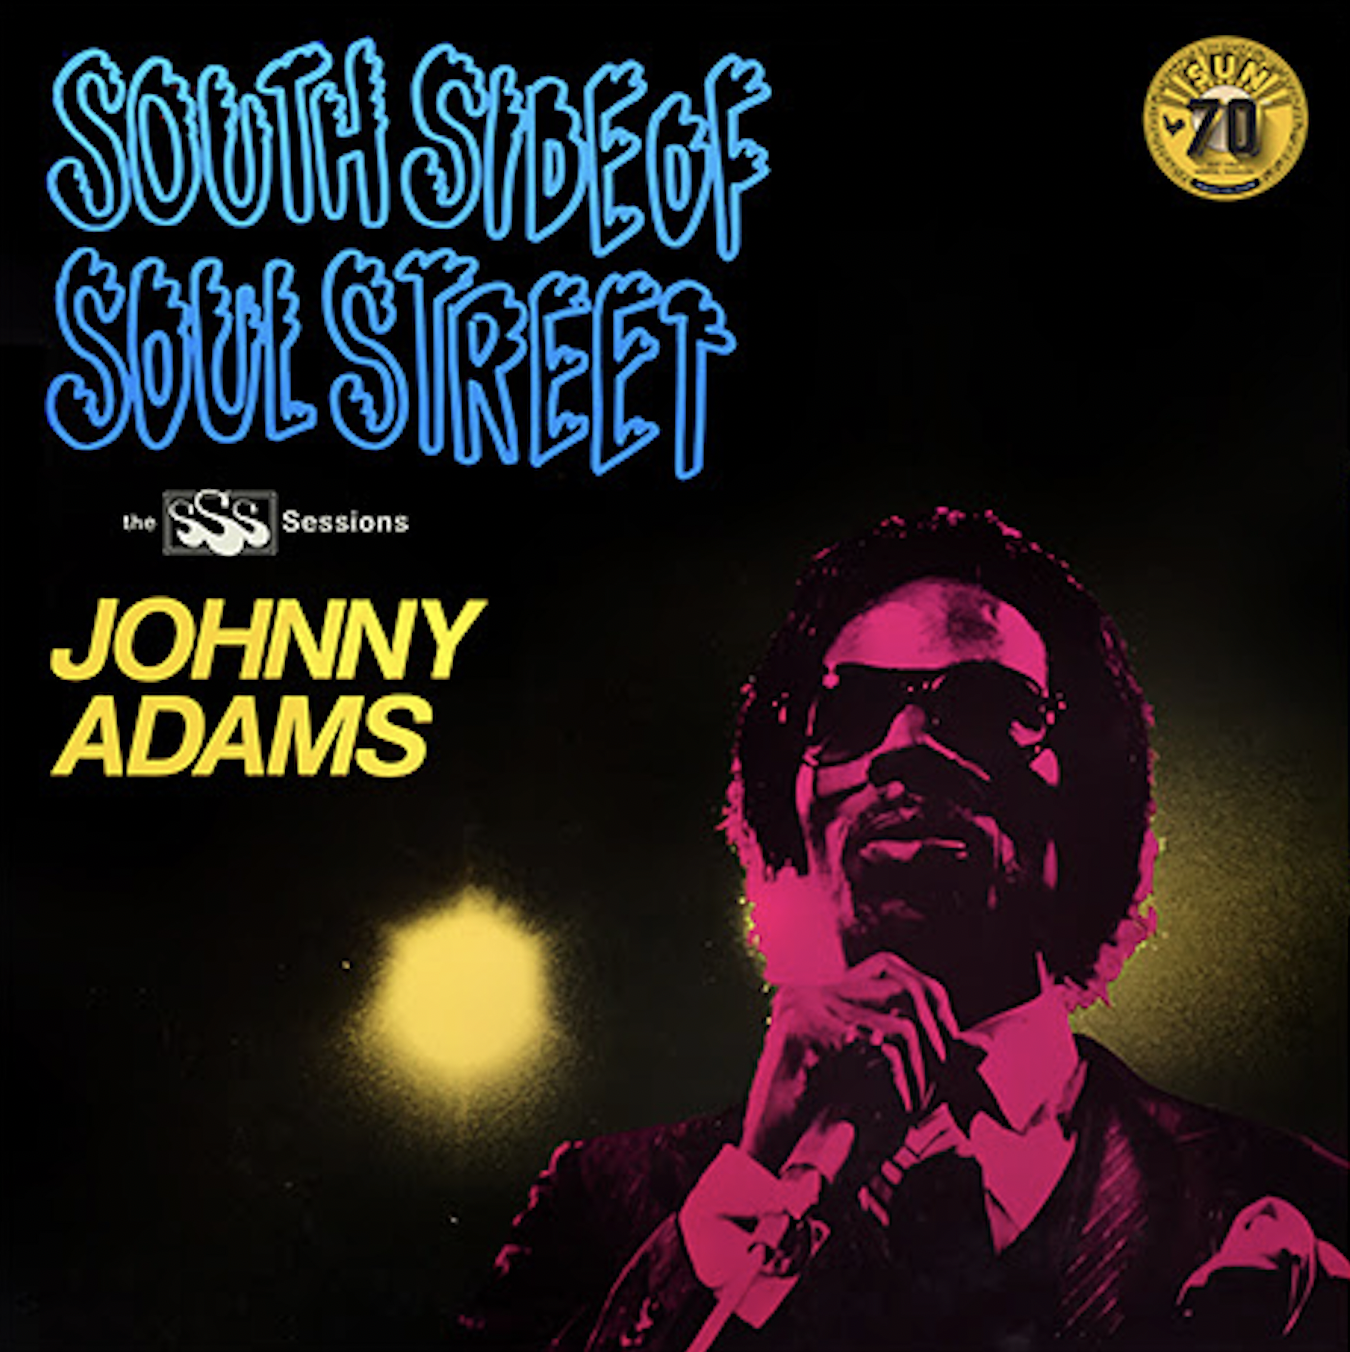 Album artwork for Album artwork for South Side Of Soul Street by Johnny Adams by South Side Of Soul Street - Johnny Adams